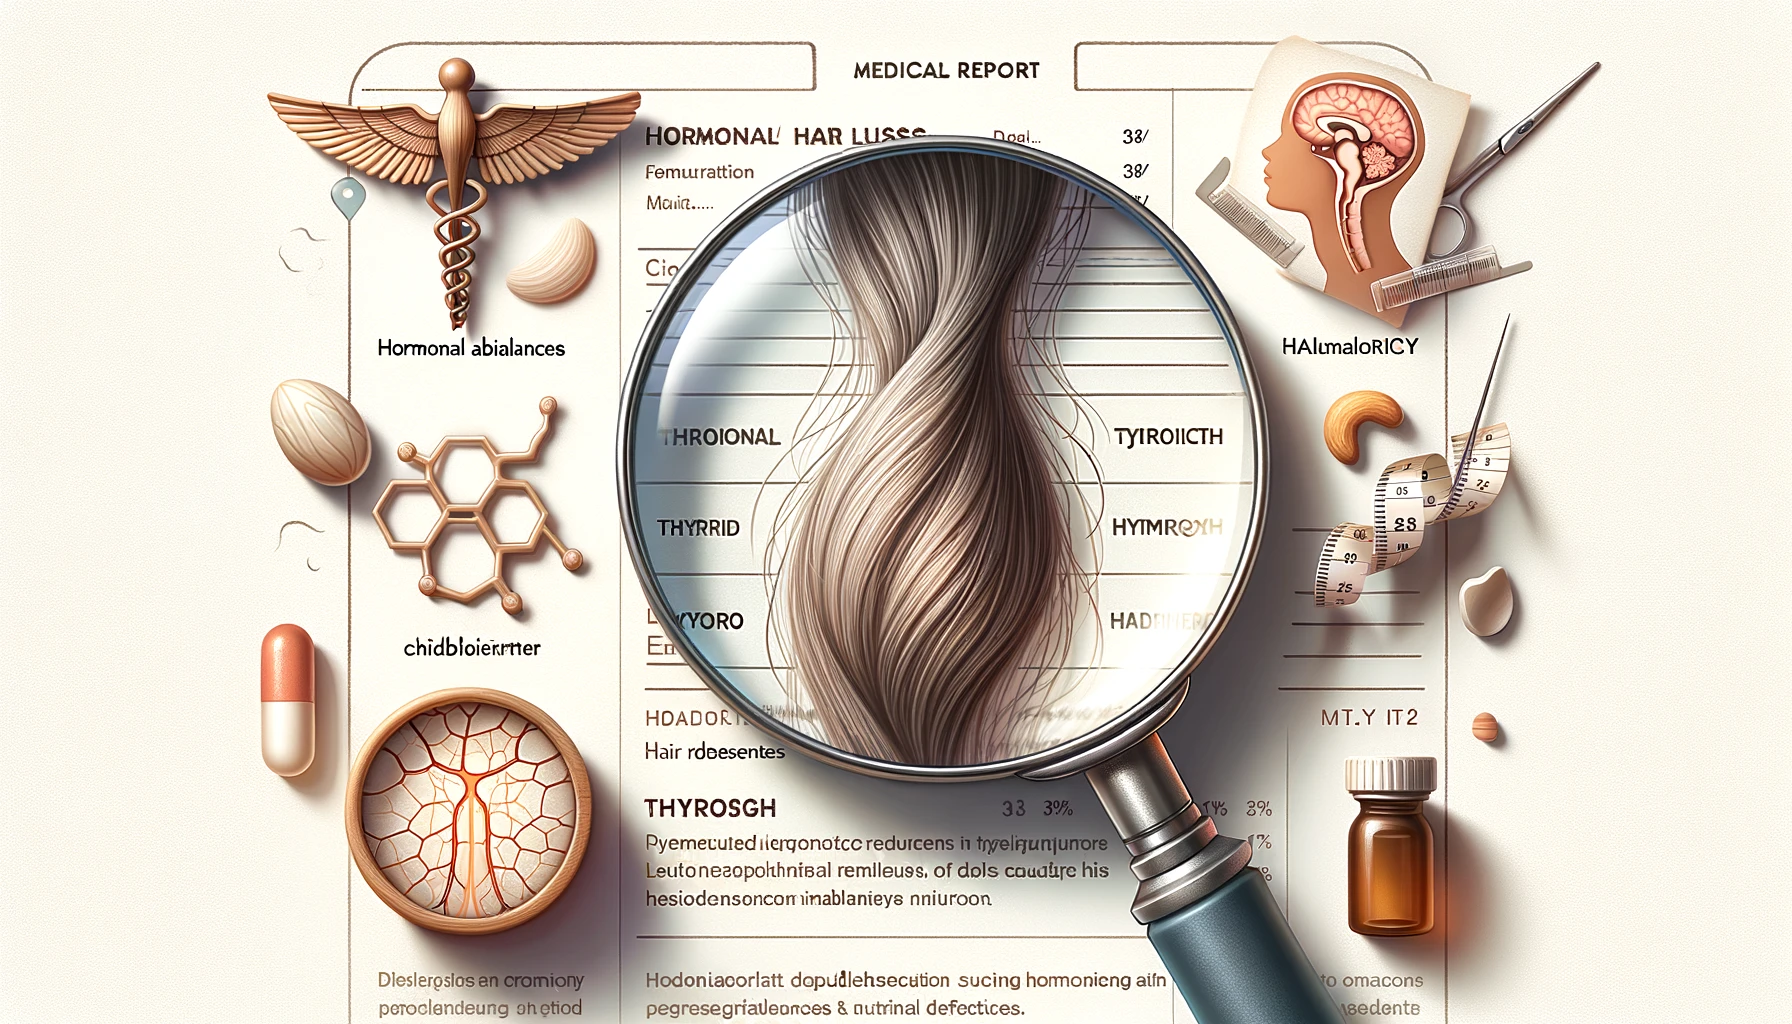 Illustration of magnified hair structure alongside medical indications for hormonal imbalances and nutrient deficiencies.